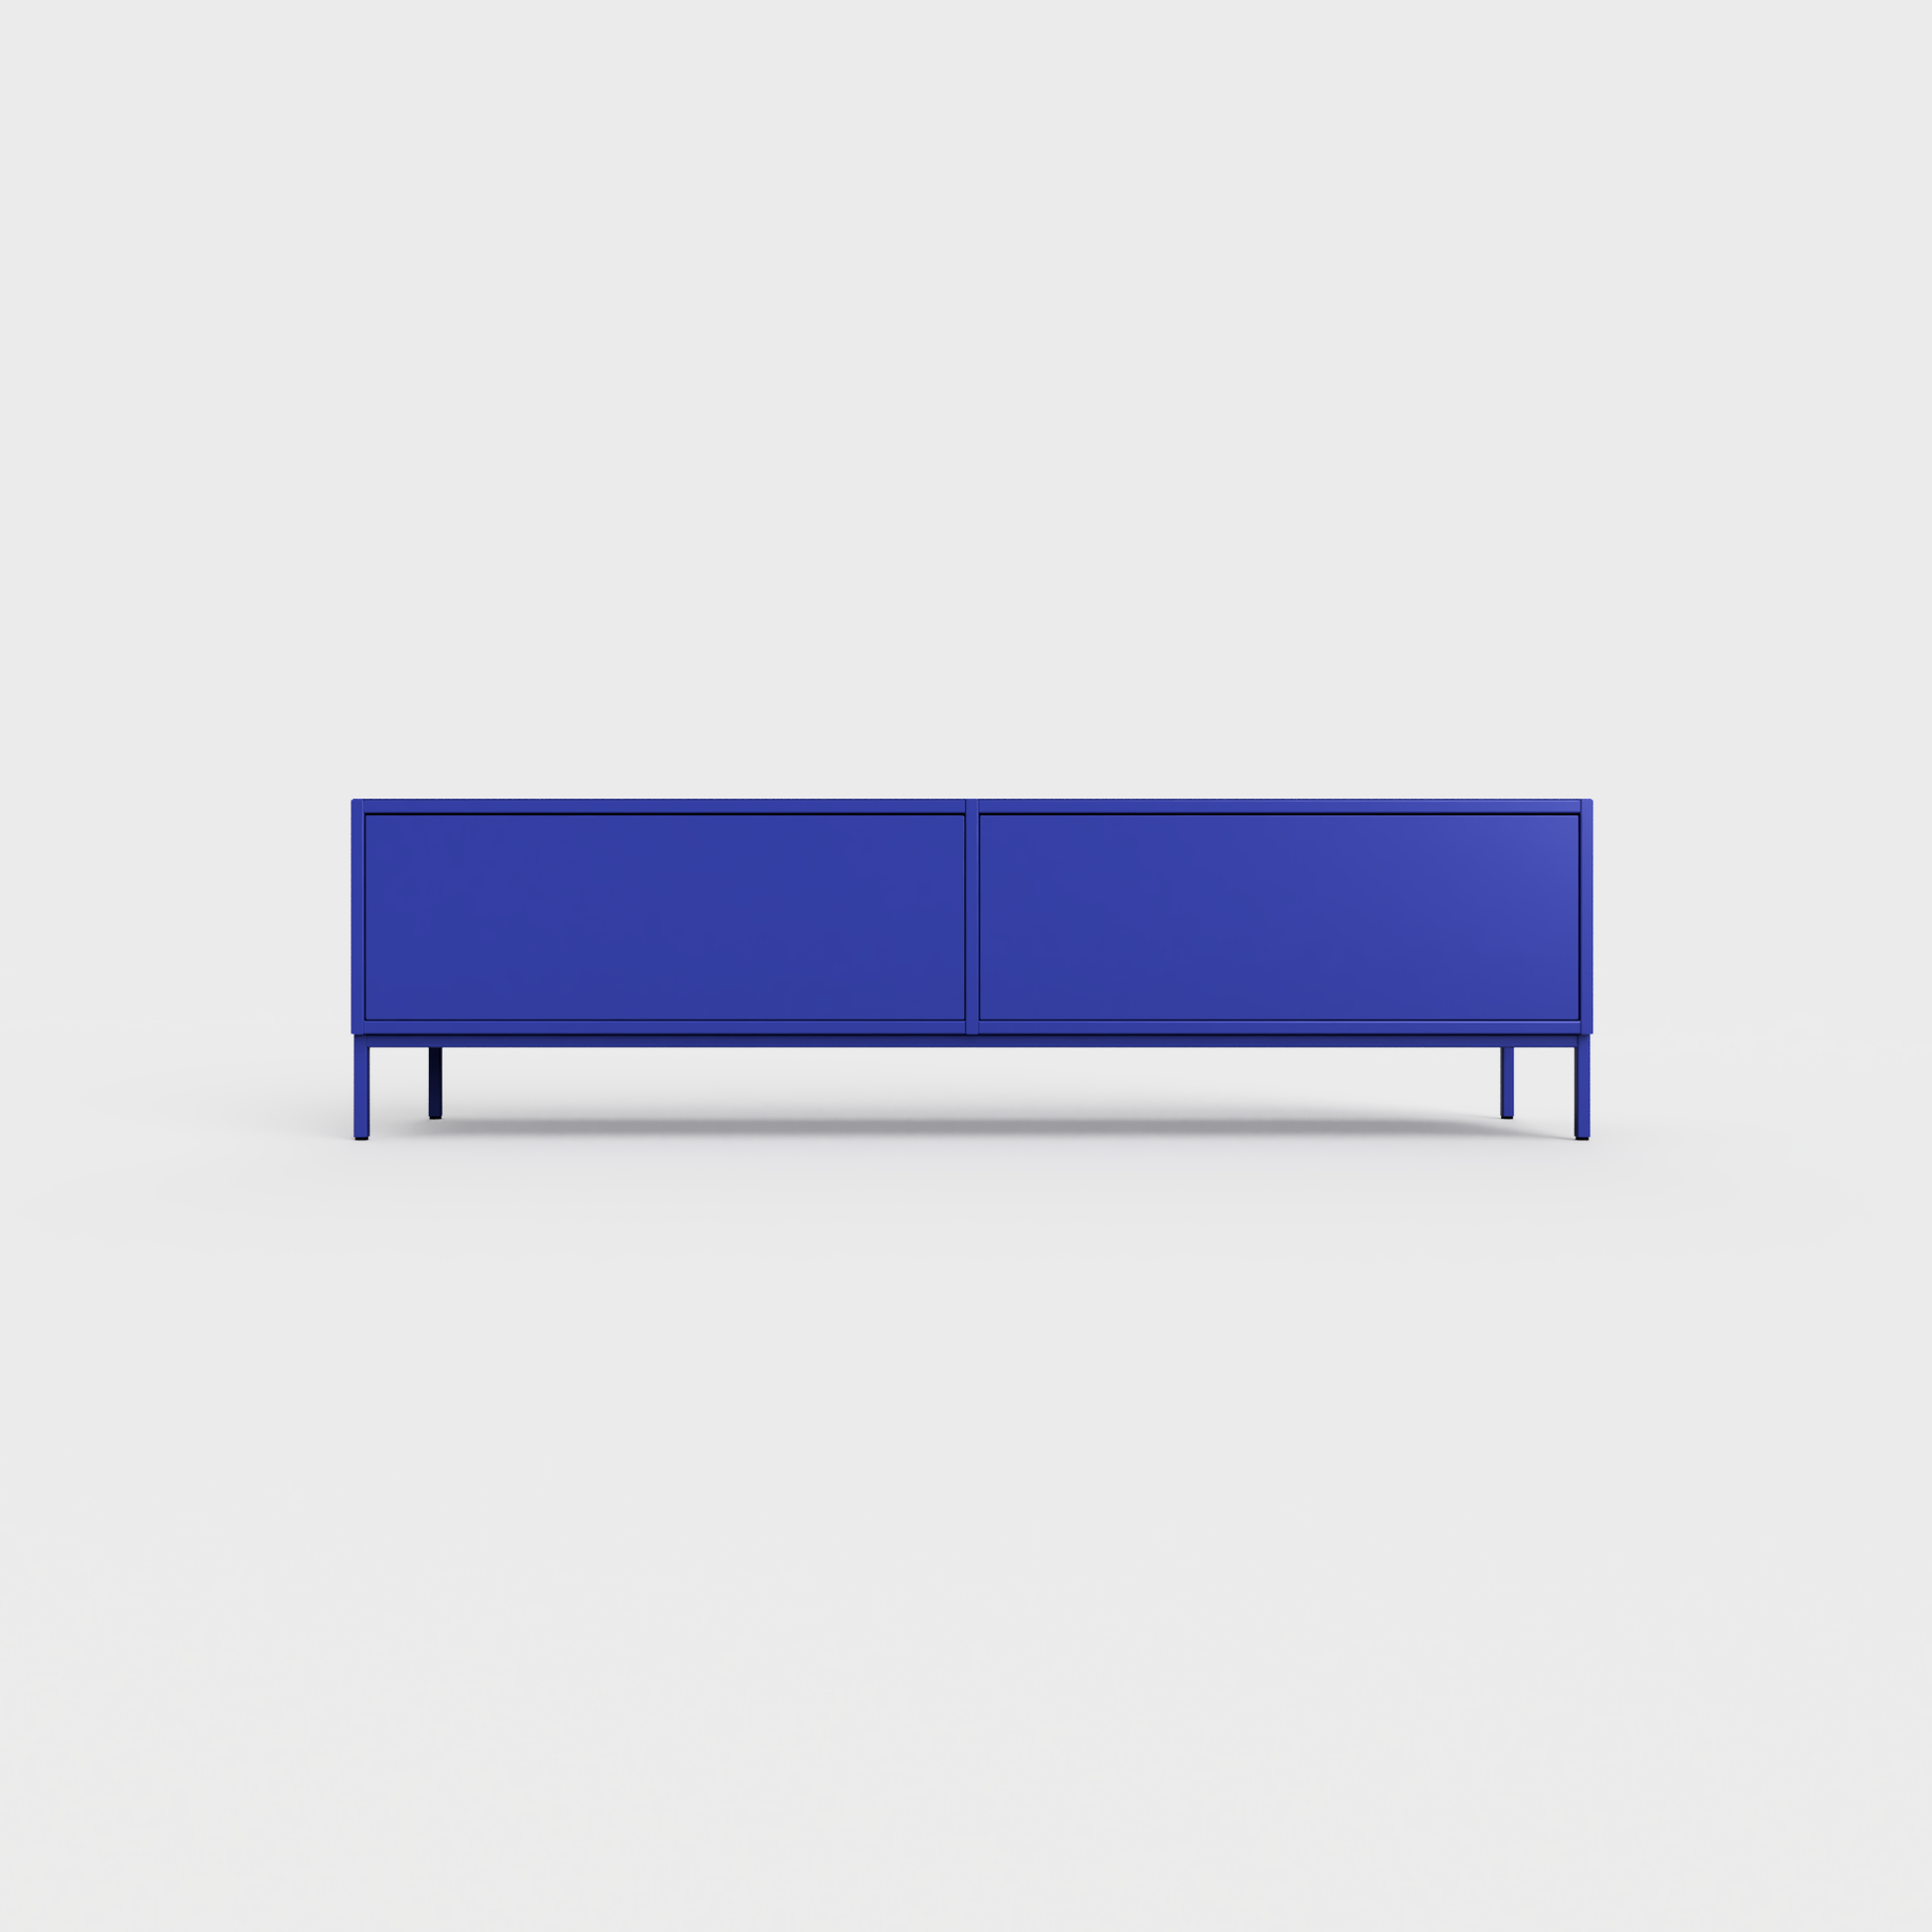 Prunus 01 Lowboard in Bluebell color, powder-coated steel, elegant and modern piece of furniture for your living room